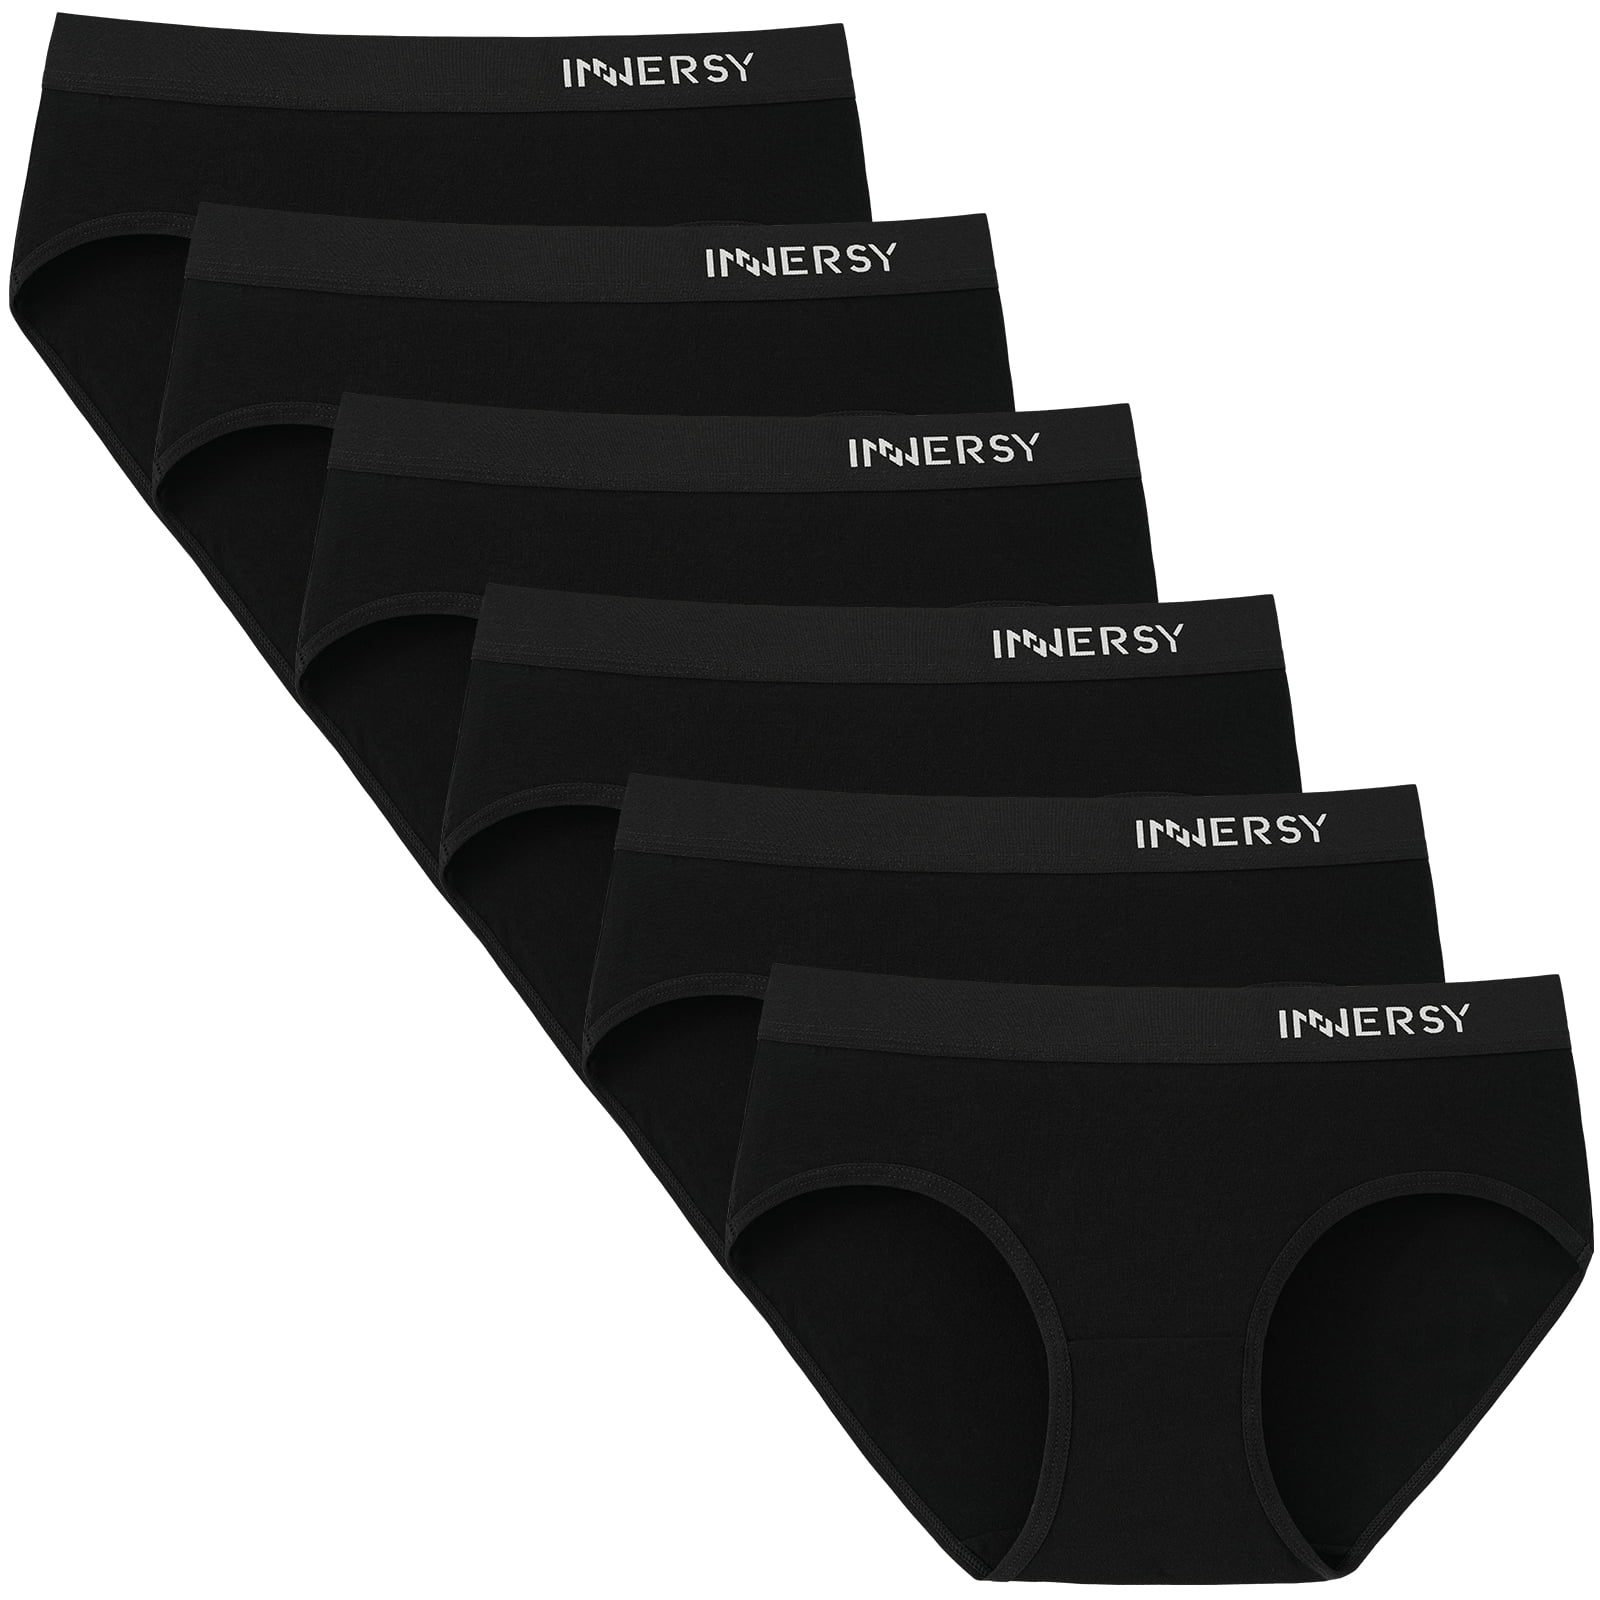 INNERSY Girls' Period Underwear for Teens Age 8-16 Cotton Boxers